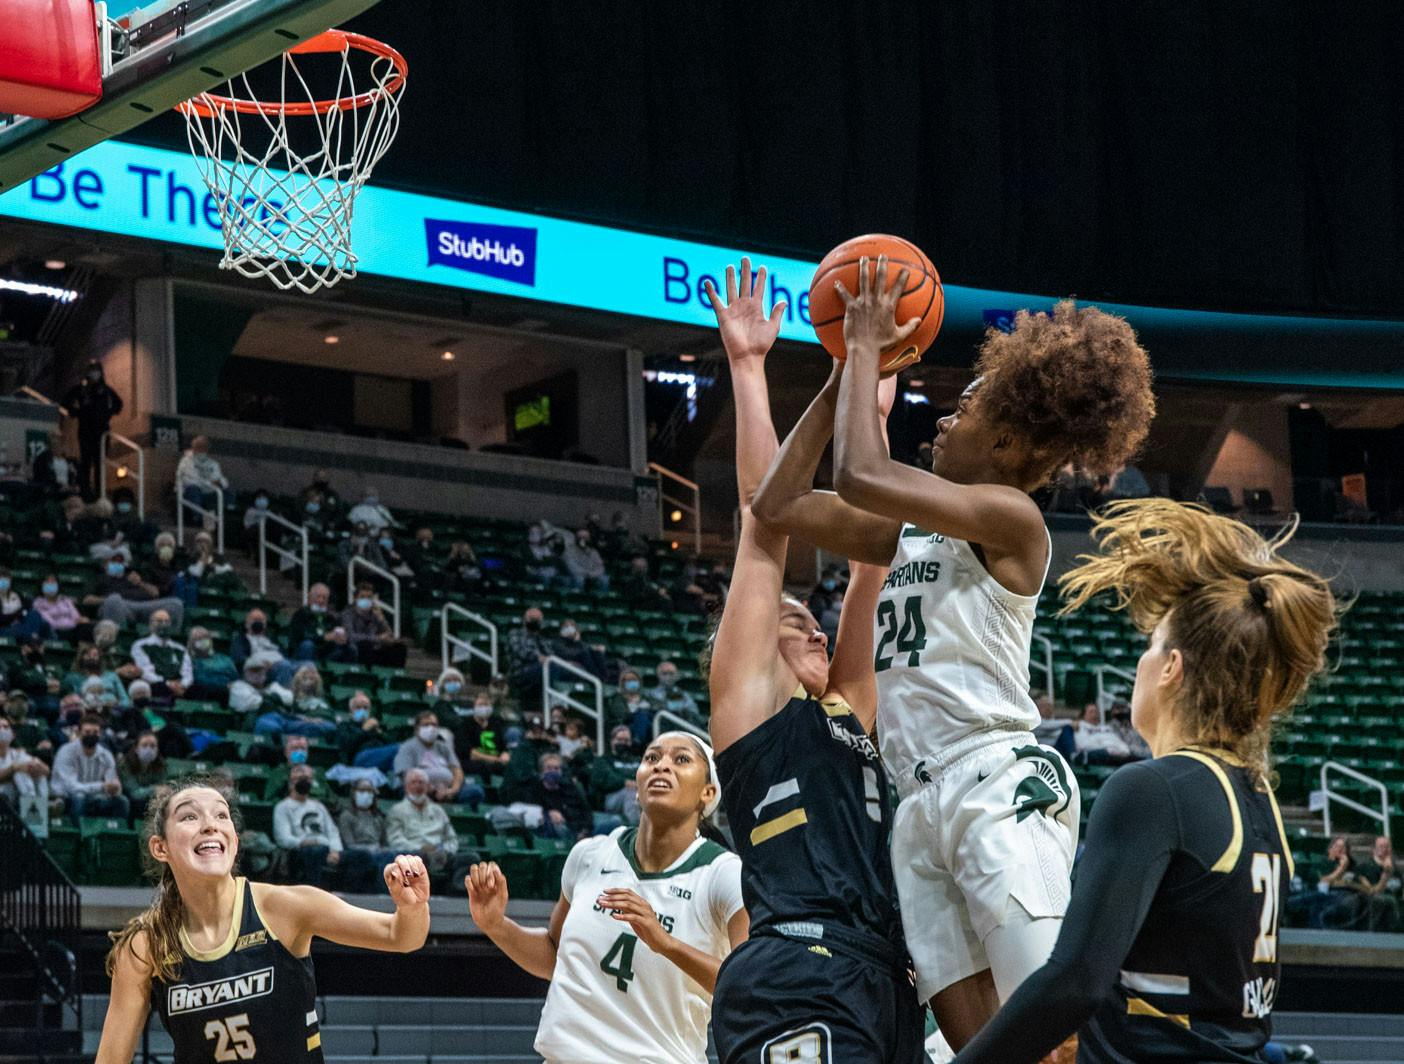 <p>Senior guard Nia Clouden (24) fights through Bryant defense to score during the fourth quarter of the game. The Spartans crushed the Bulldogs, 100-60, which led coach Suzy Merchant to her 300th win with Michigan State on Nov. 19, 2021.</p>